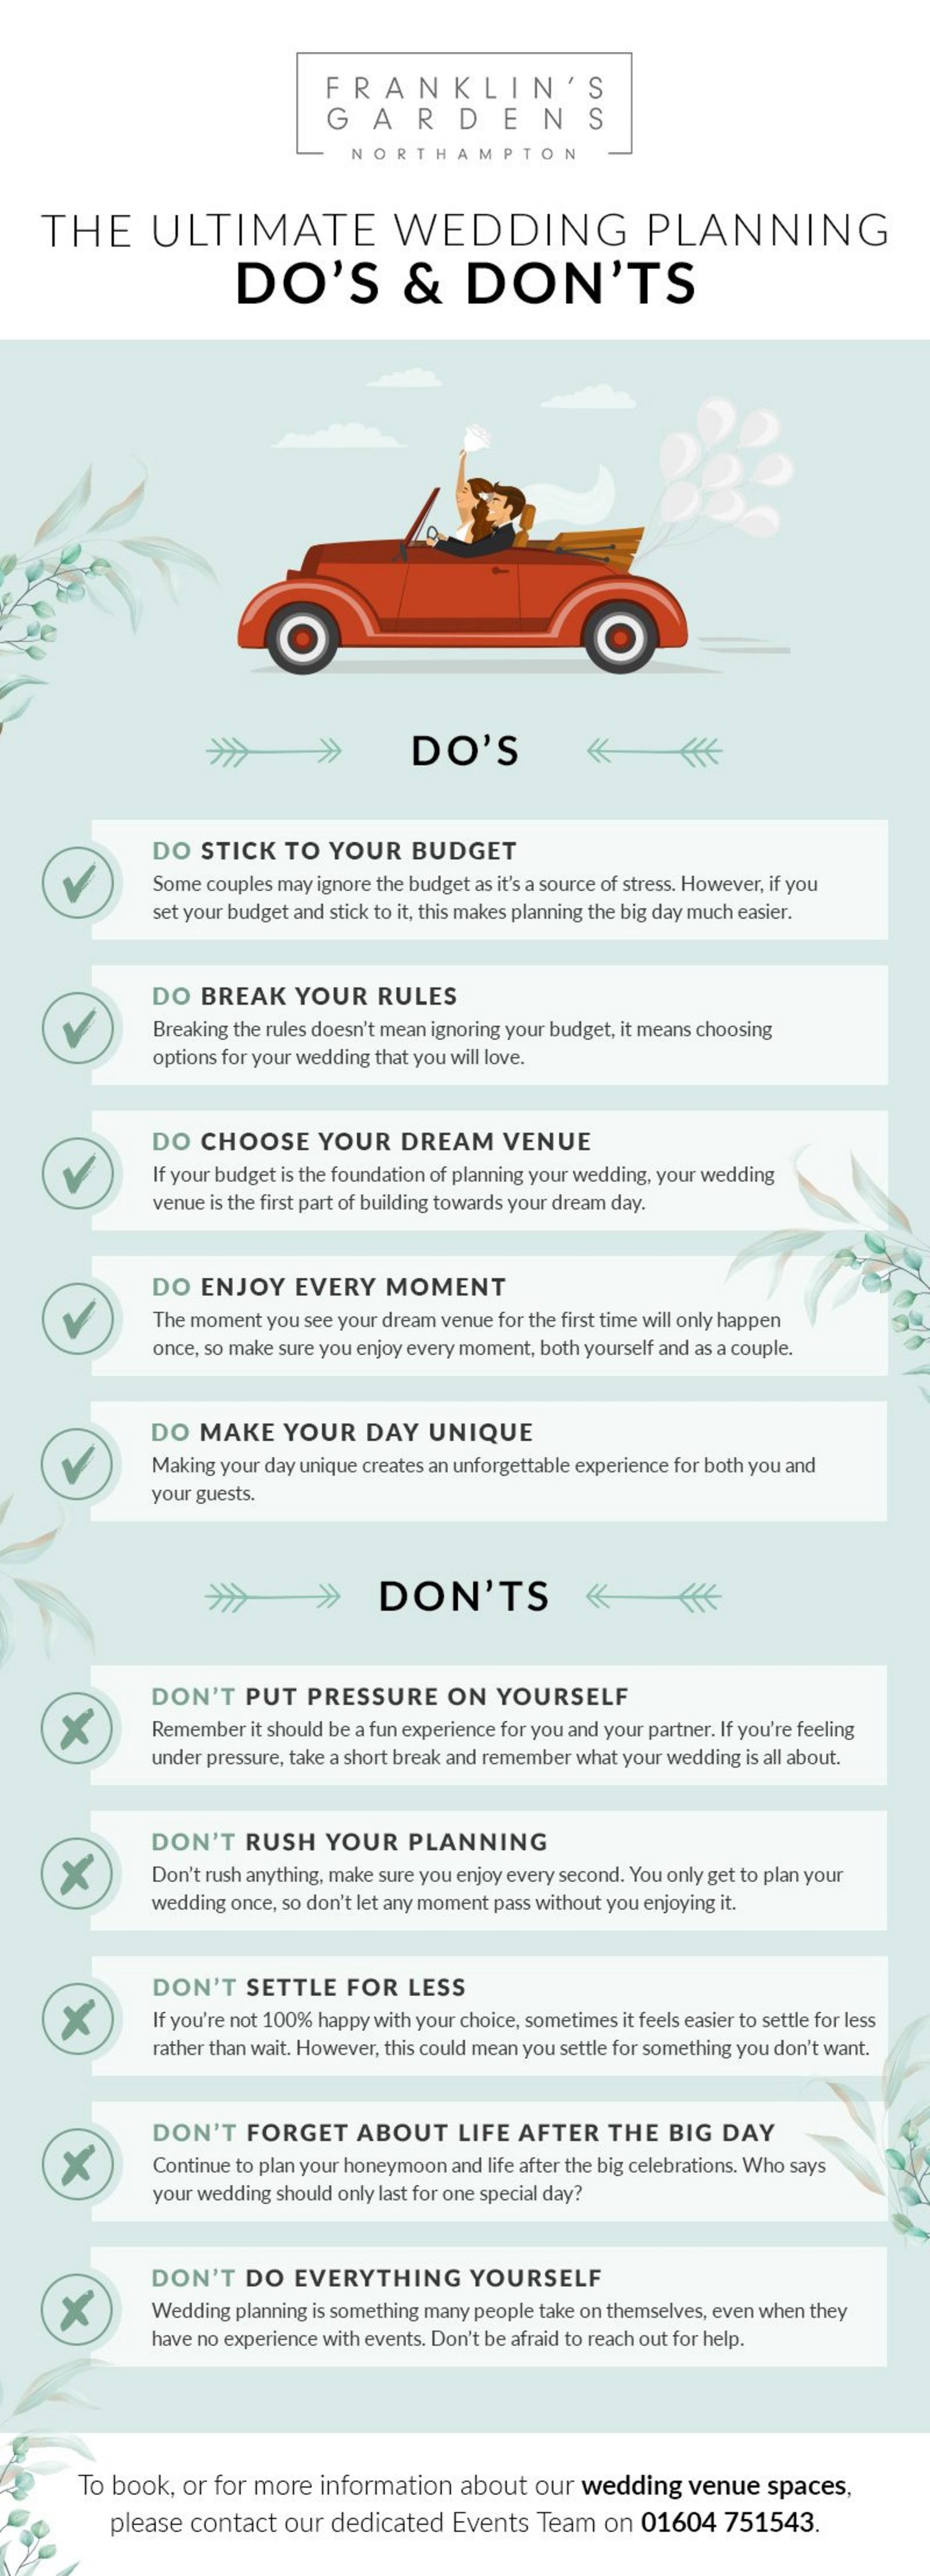  Discover our key list of what to do and what not to do when planning your wedding. Book your wedding venue at Franklin's Gardens today.